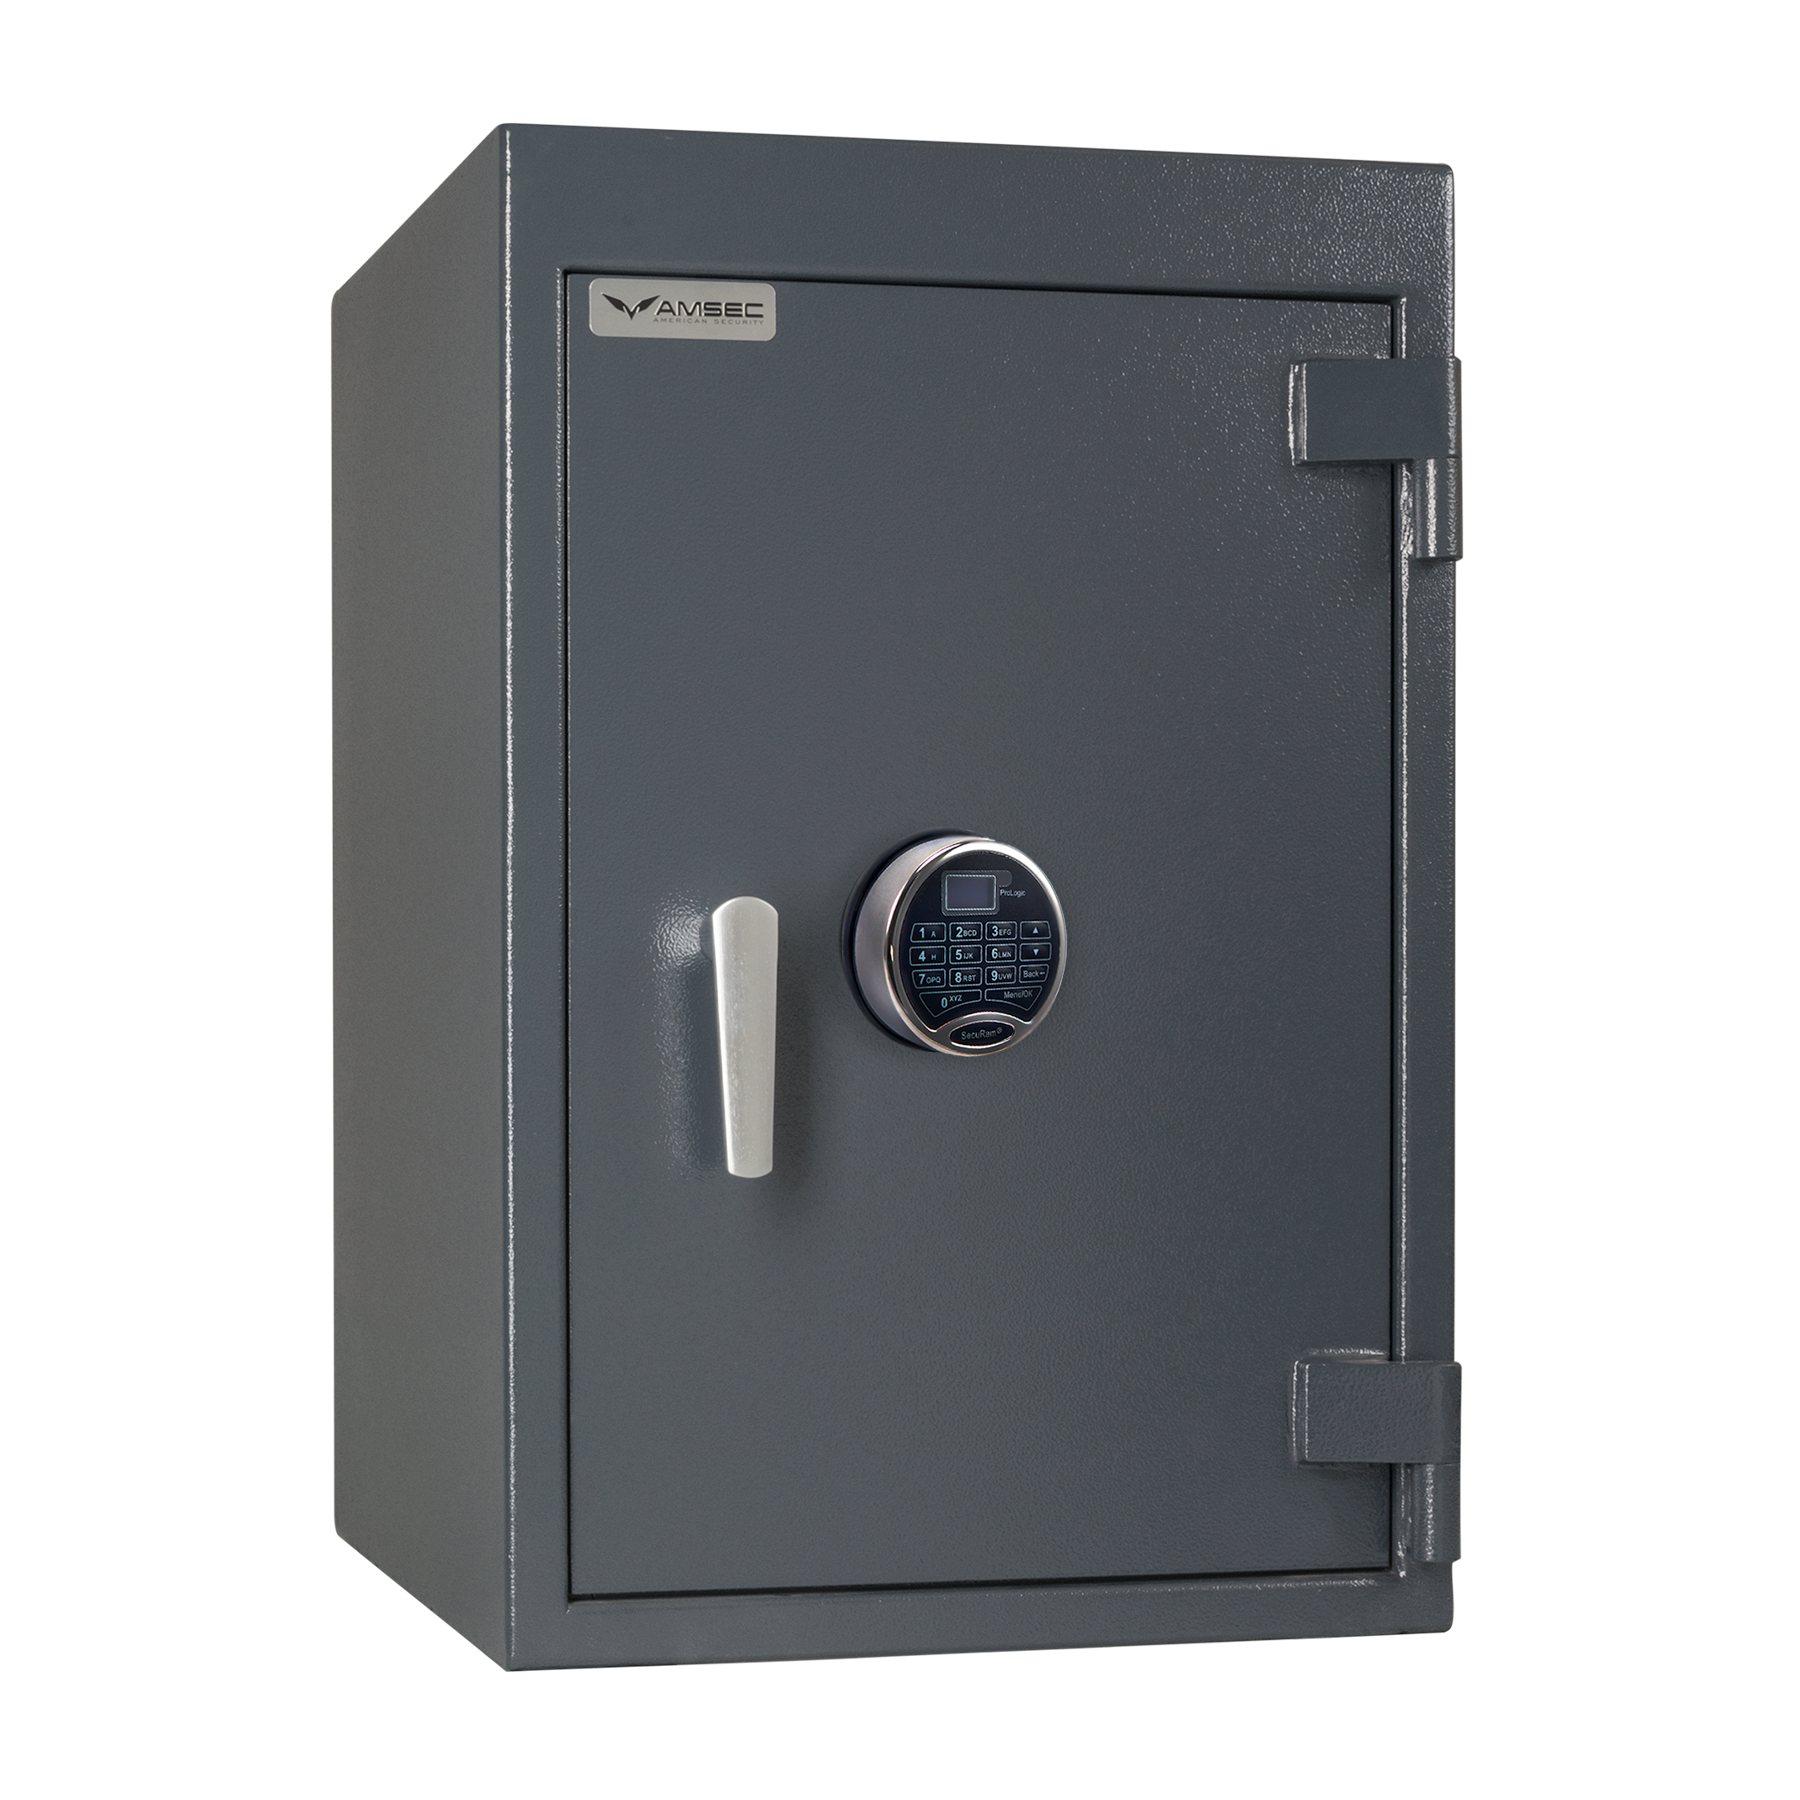 BWB-3020 Pharmacy Safe with Time Delay Lock